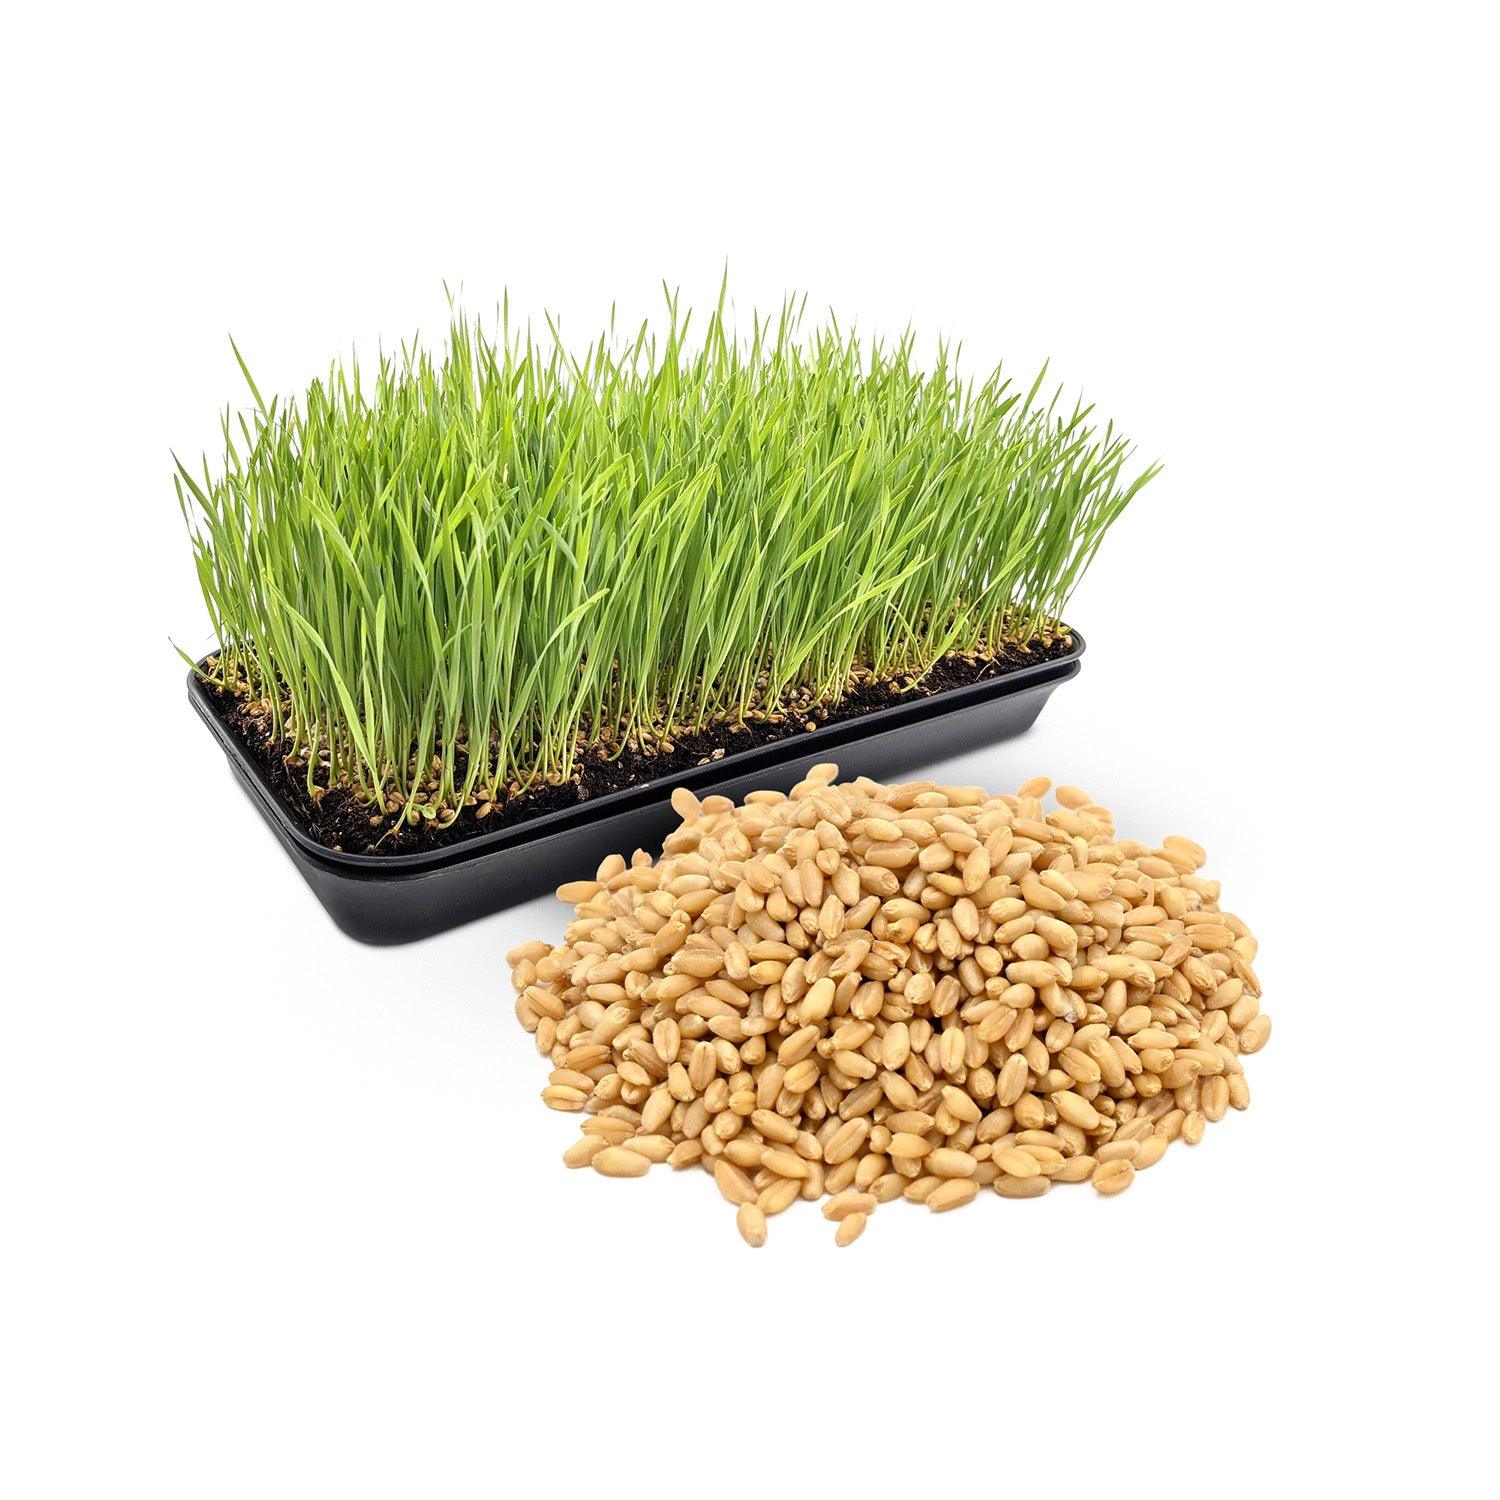 Wheatgrass Seeds for Growing Microgreens & Sprouts 900g | Organic Microgreen Seeds for Kitchen Gardening